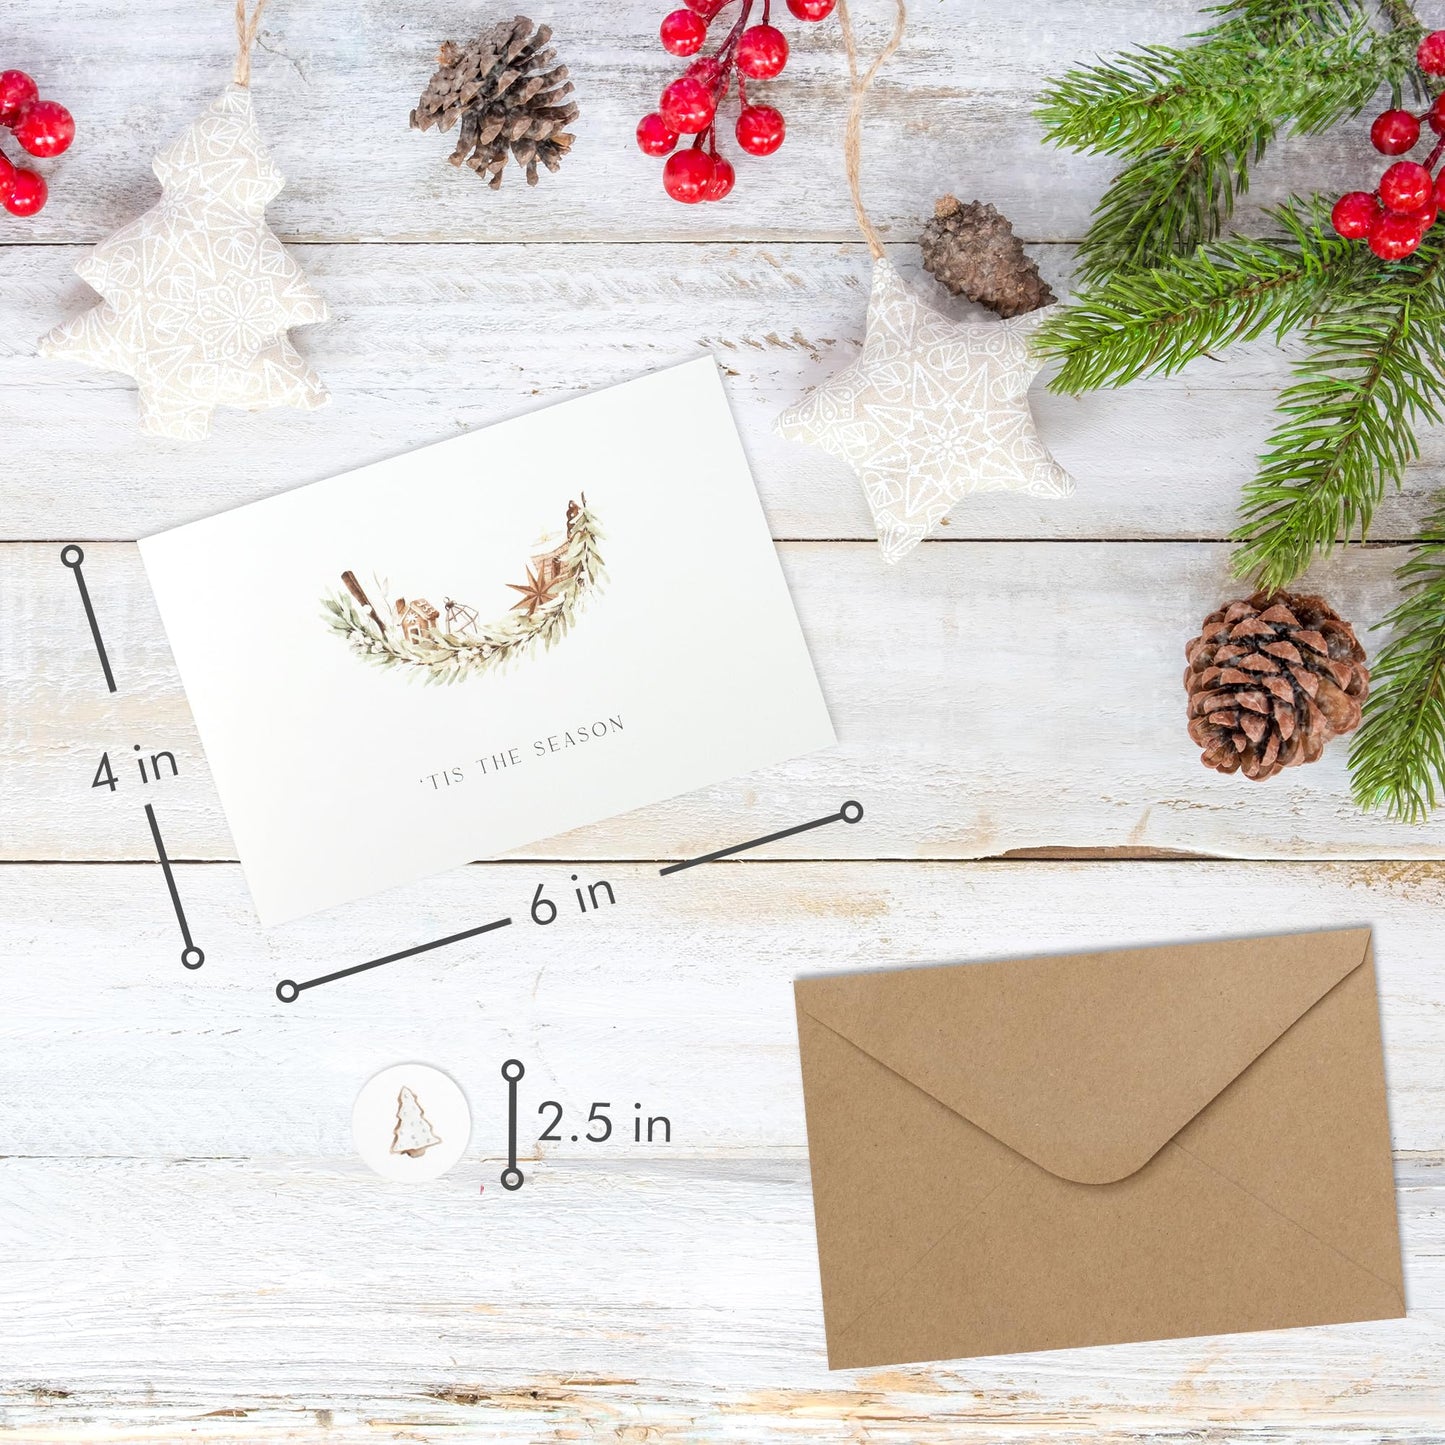 ZICOTO Beautiful Modern Rustic Christmas Cards Set of 20 - Incl. Bulk Envelopes, Matching Stickers And Storage Box - Perfect to Send Warm Holiday Wishes to Friends and Family